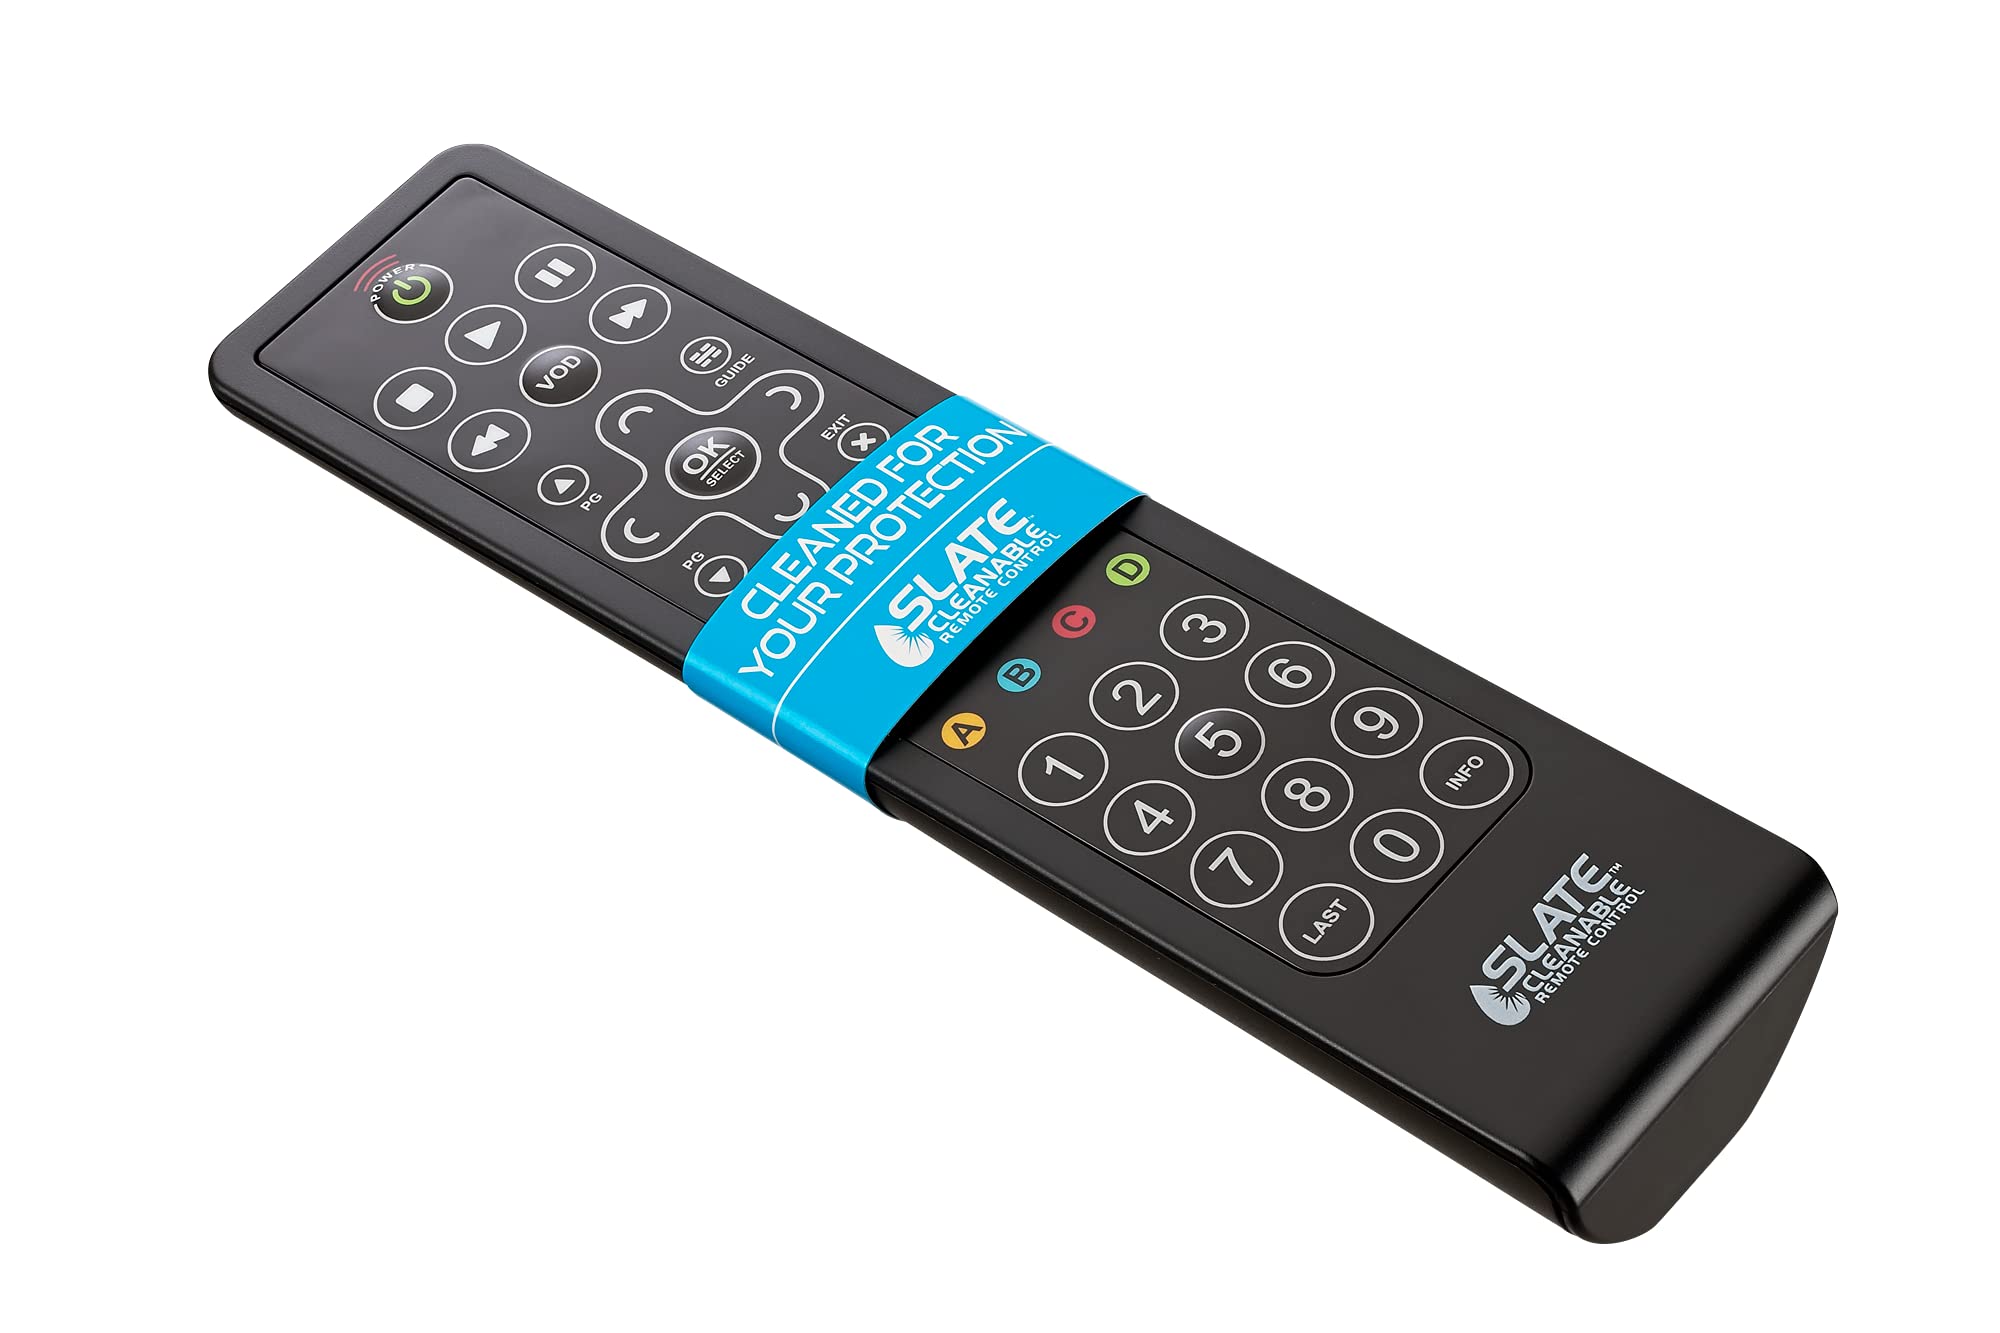 One For All Slate Remote (Packs of 20 Remote Controls), Black, Smal (R18200BB00)